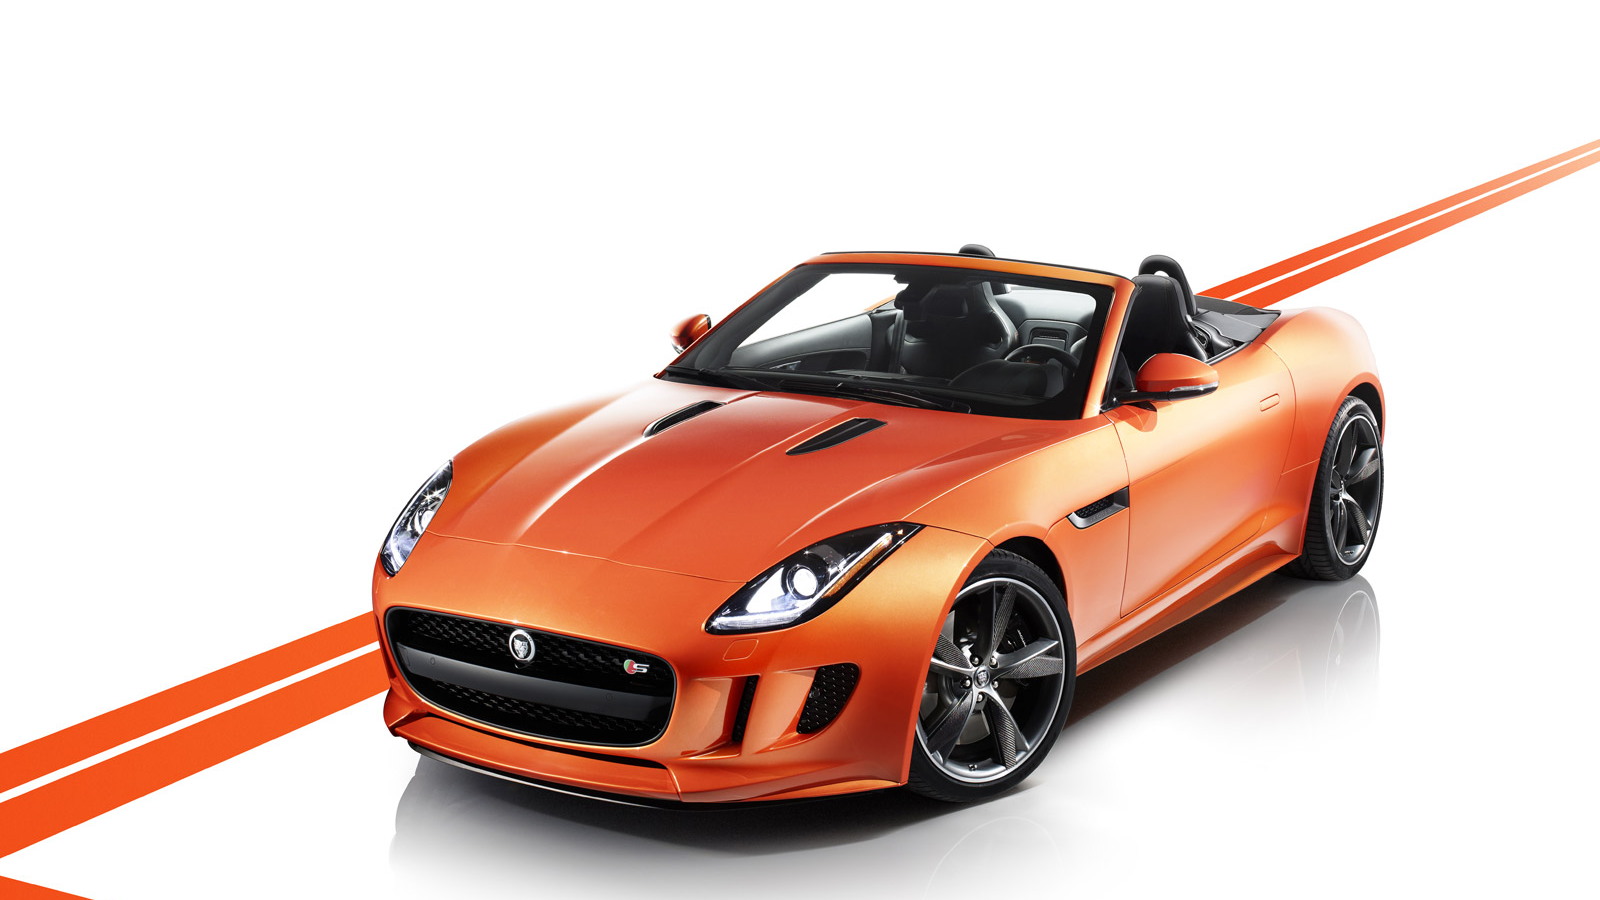 2014 Jaguar F-Type with Firesand paint and Design and Black exterior and interior upgrades